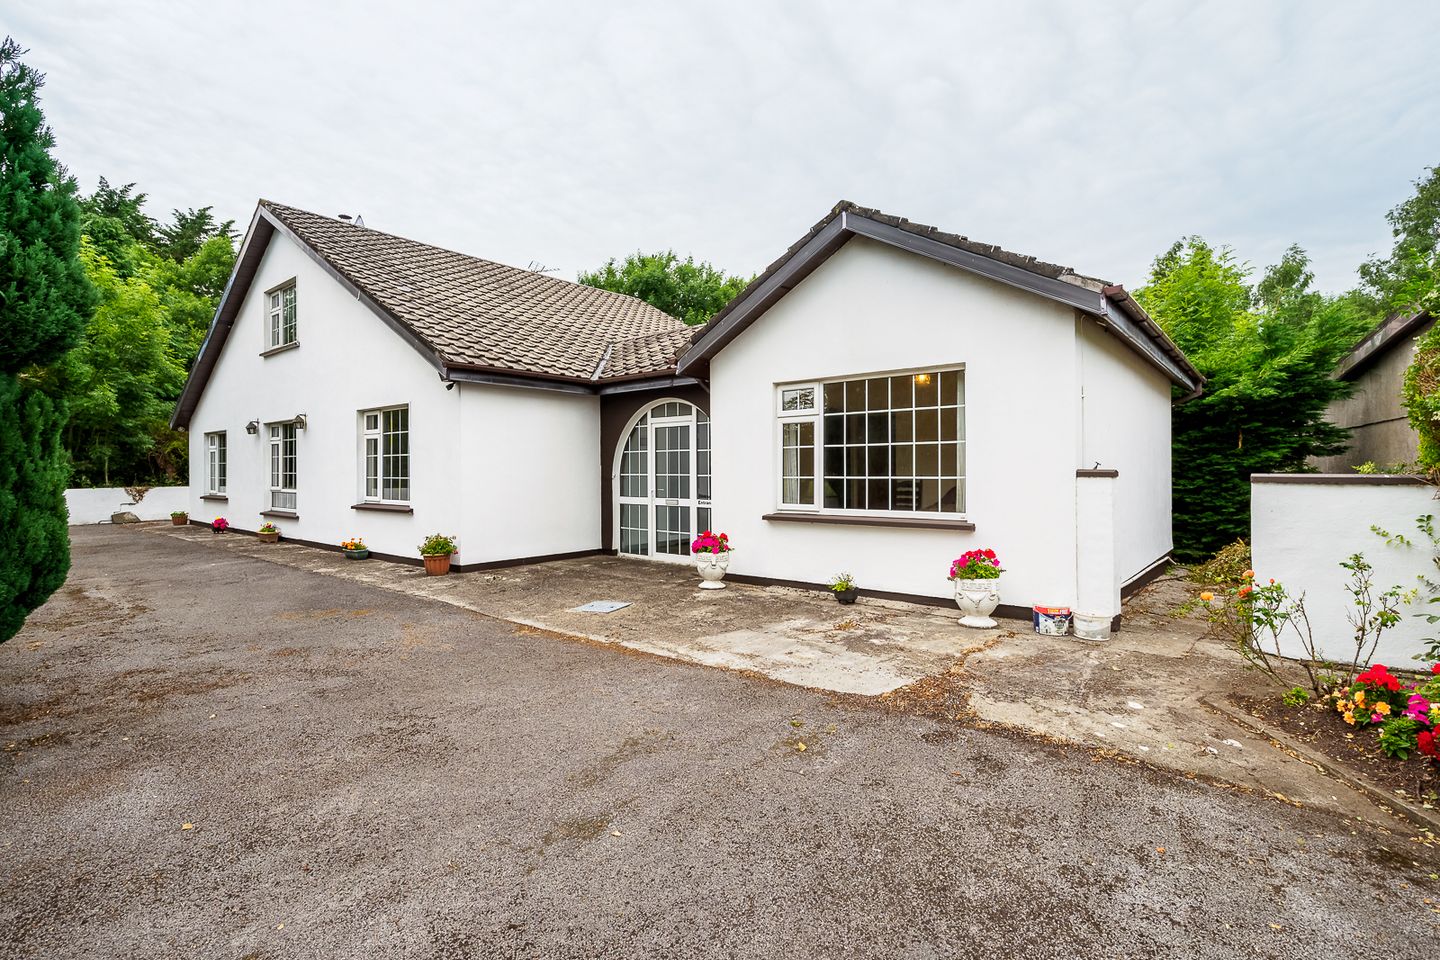 PORT HOUSE, Port House, Tipperary Town, Co. Tipperary, E34CP27